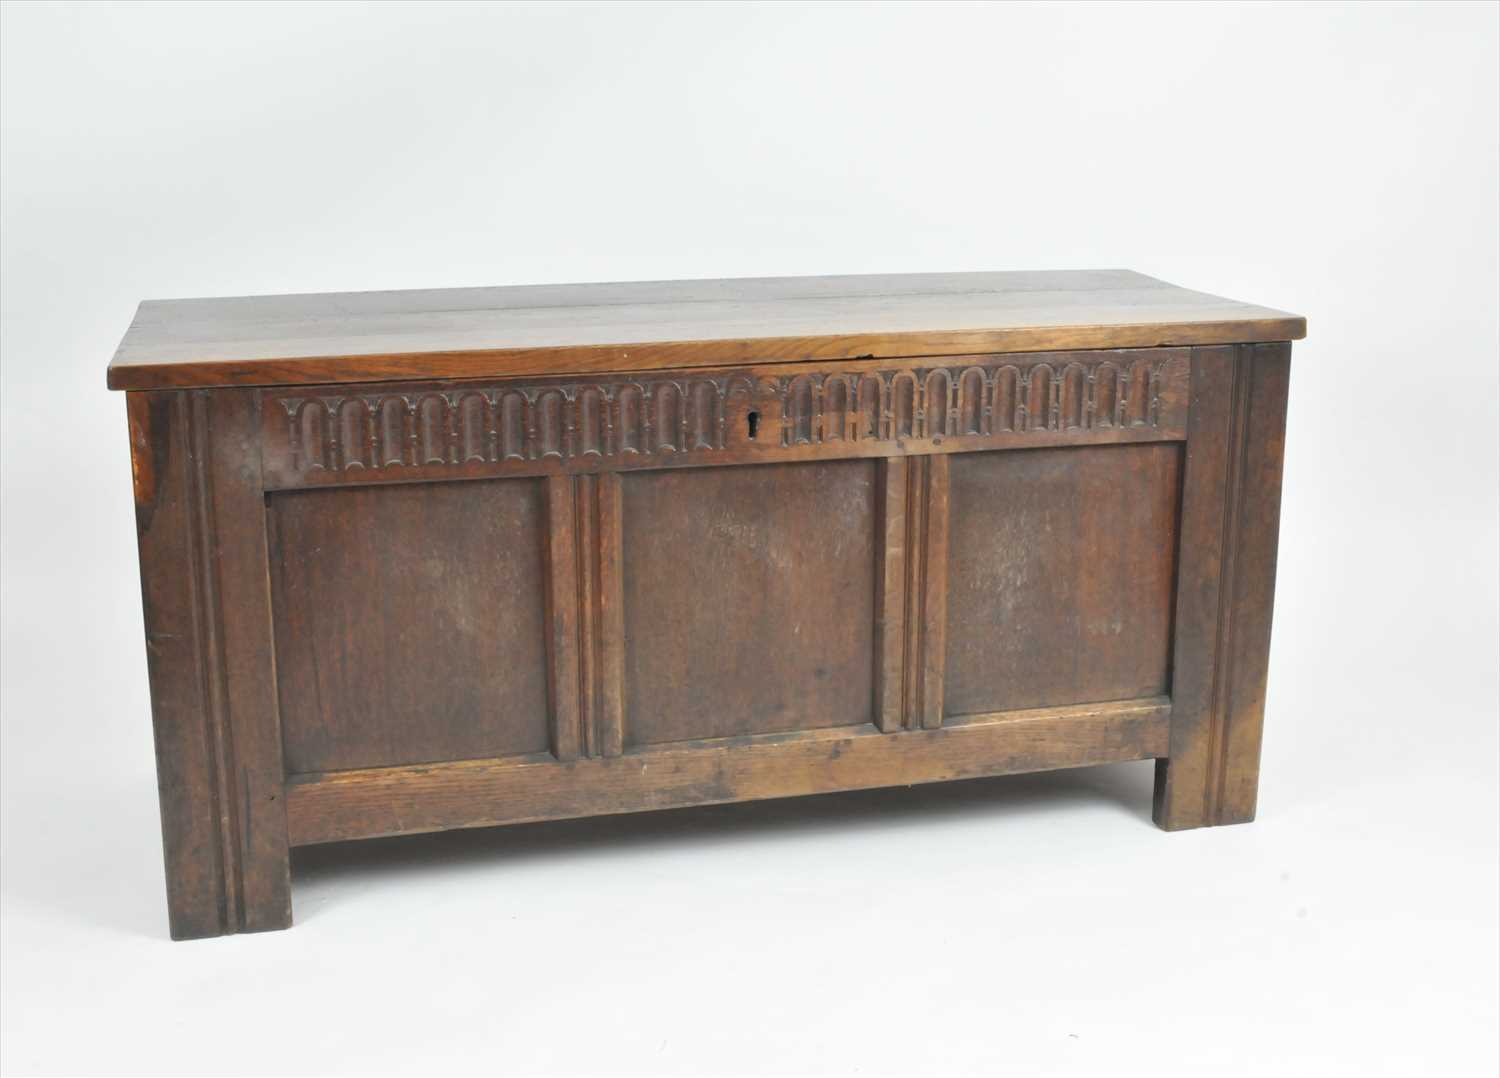 An 18th century and later country oak coffer